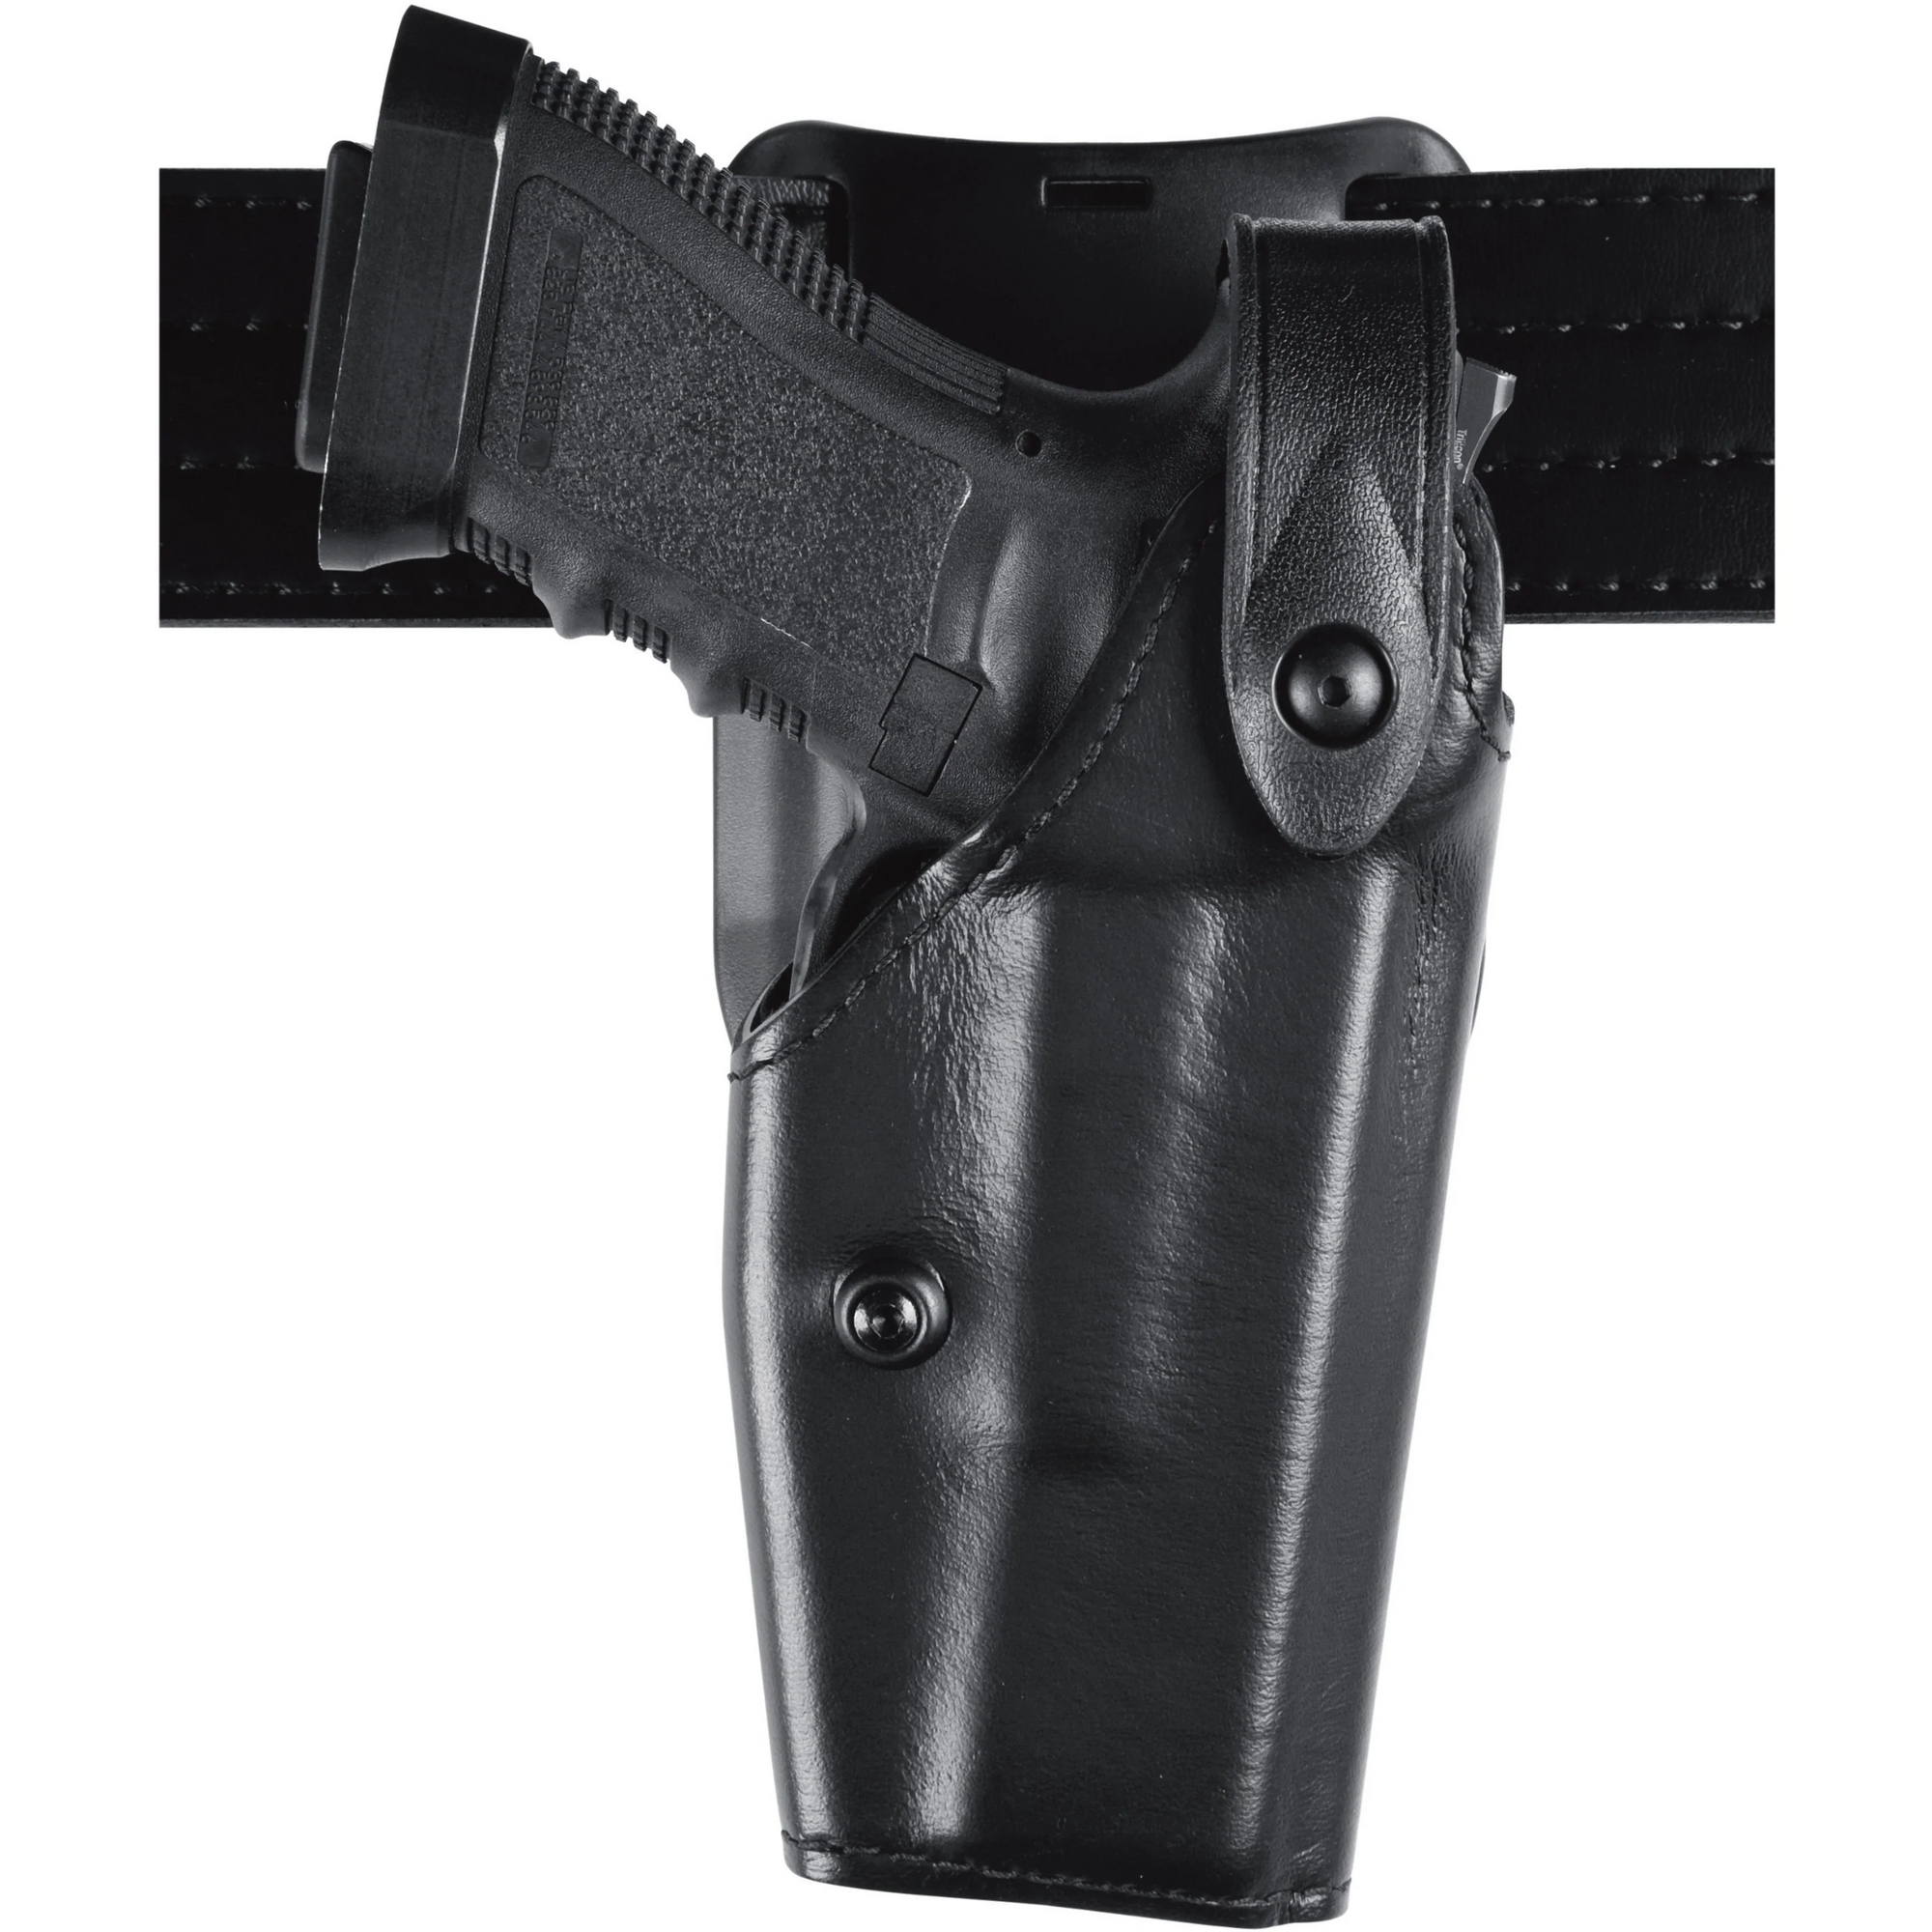 Model 6285 Sls Low-ride, Level Ii Retention Duty Holster For Smith & Wesson M&p 9 W/ Surefire Light